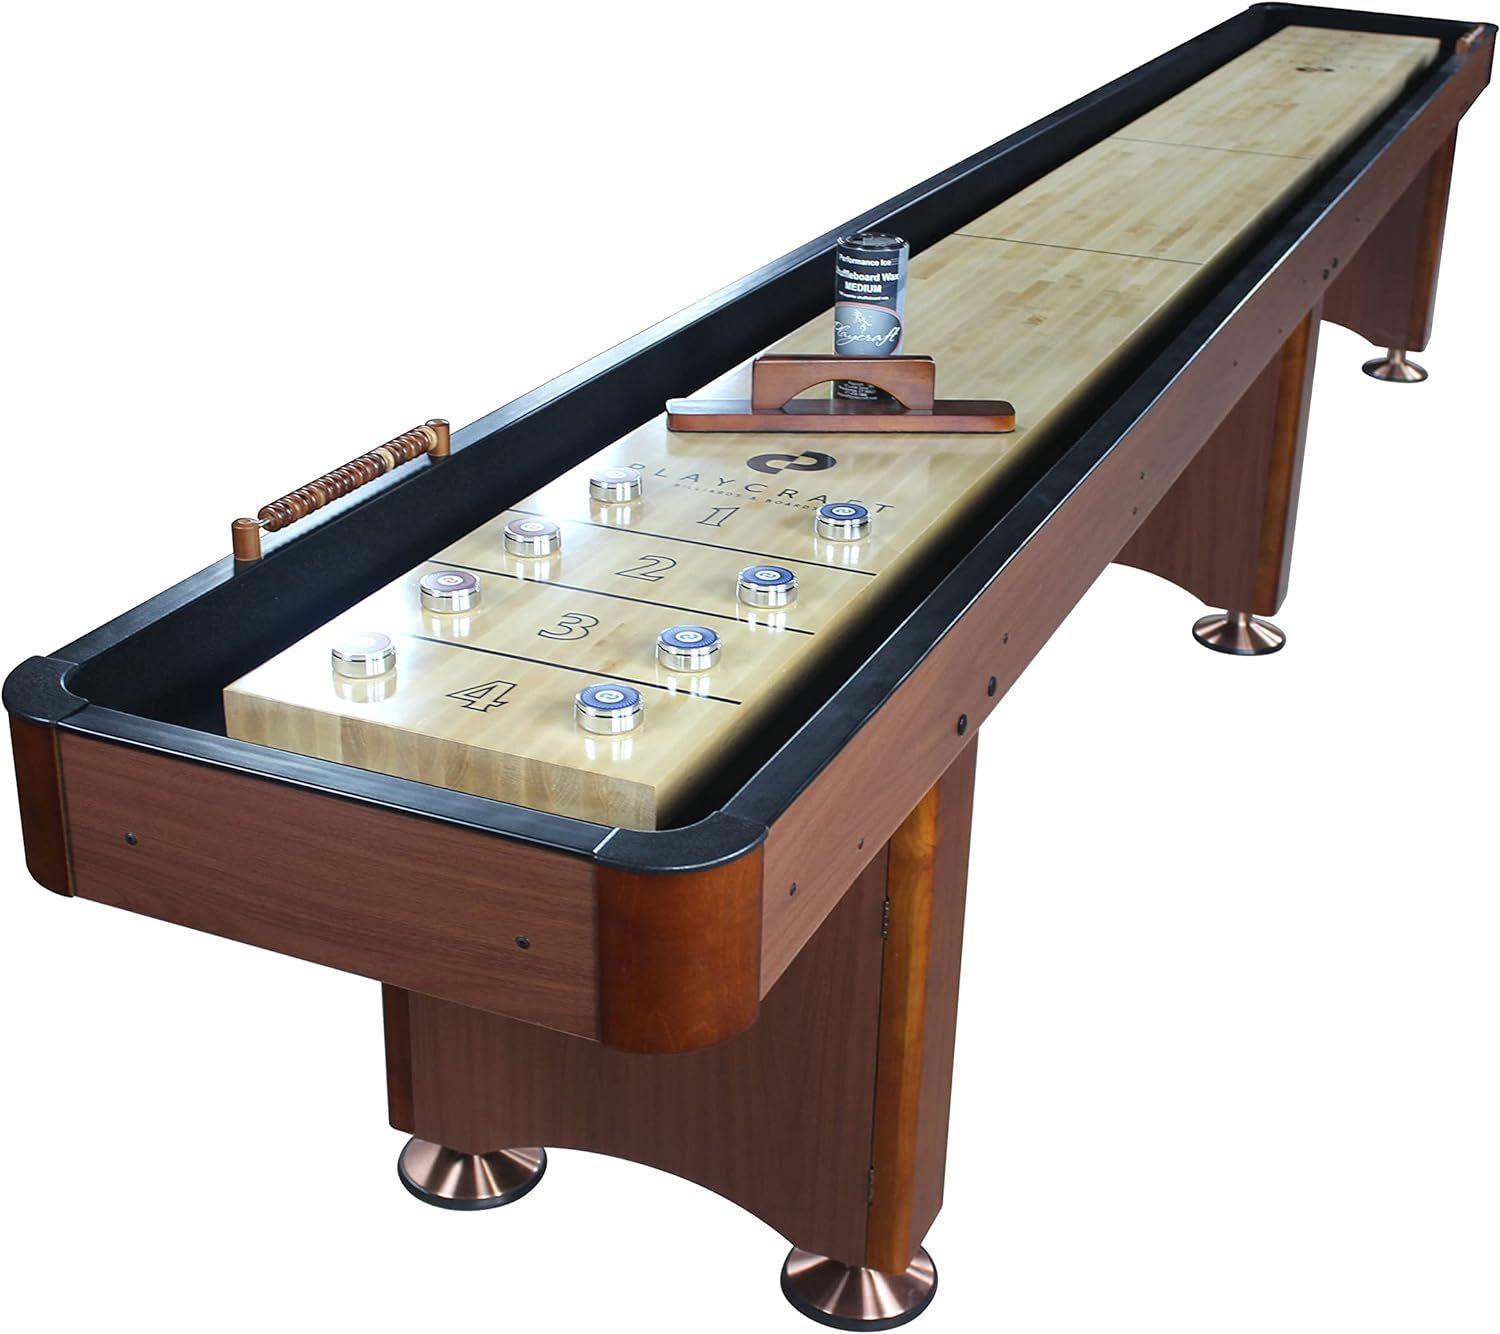 Top 10 Shuffleboard Tables for Your Game Room Fun